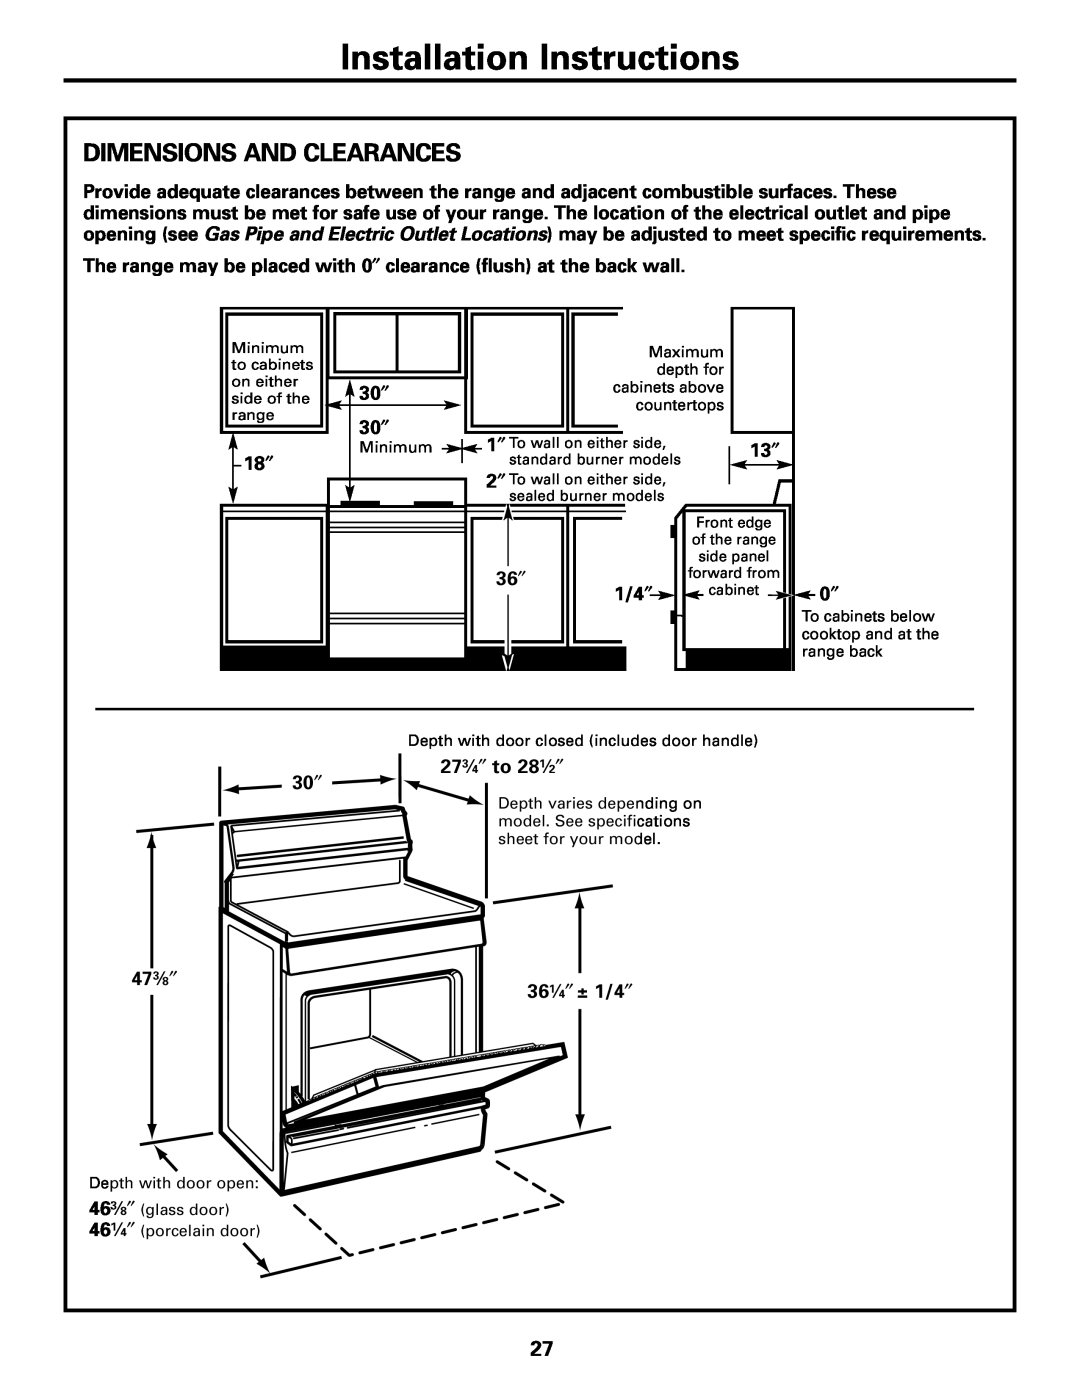 Americana Appliances AGBS300 Dimensions And Clearances, Installation Instructions, 36 ″, 1/4 ″, 273⁄4″ to 281⁄2″, 473⁄8″ 